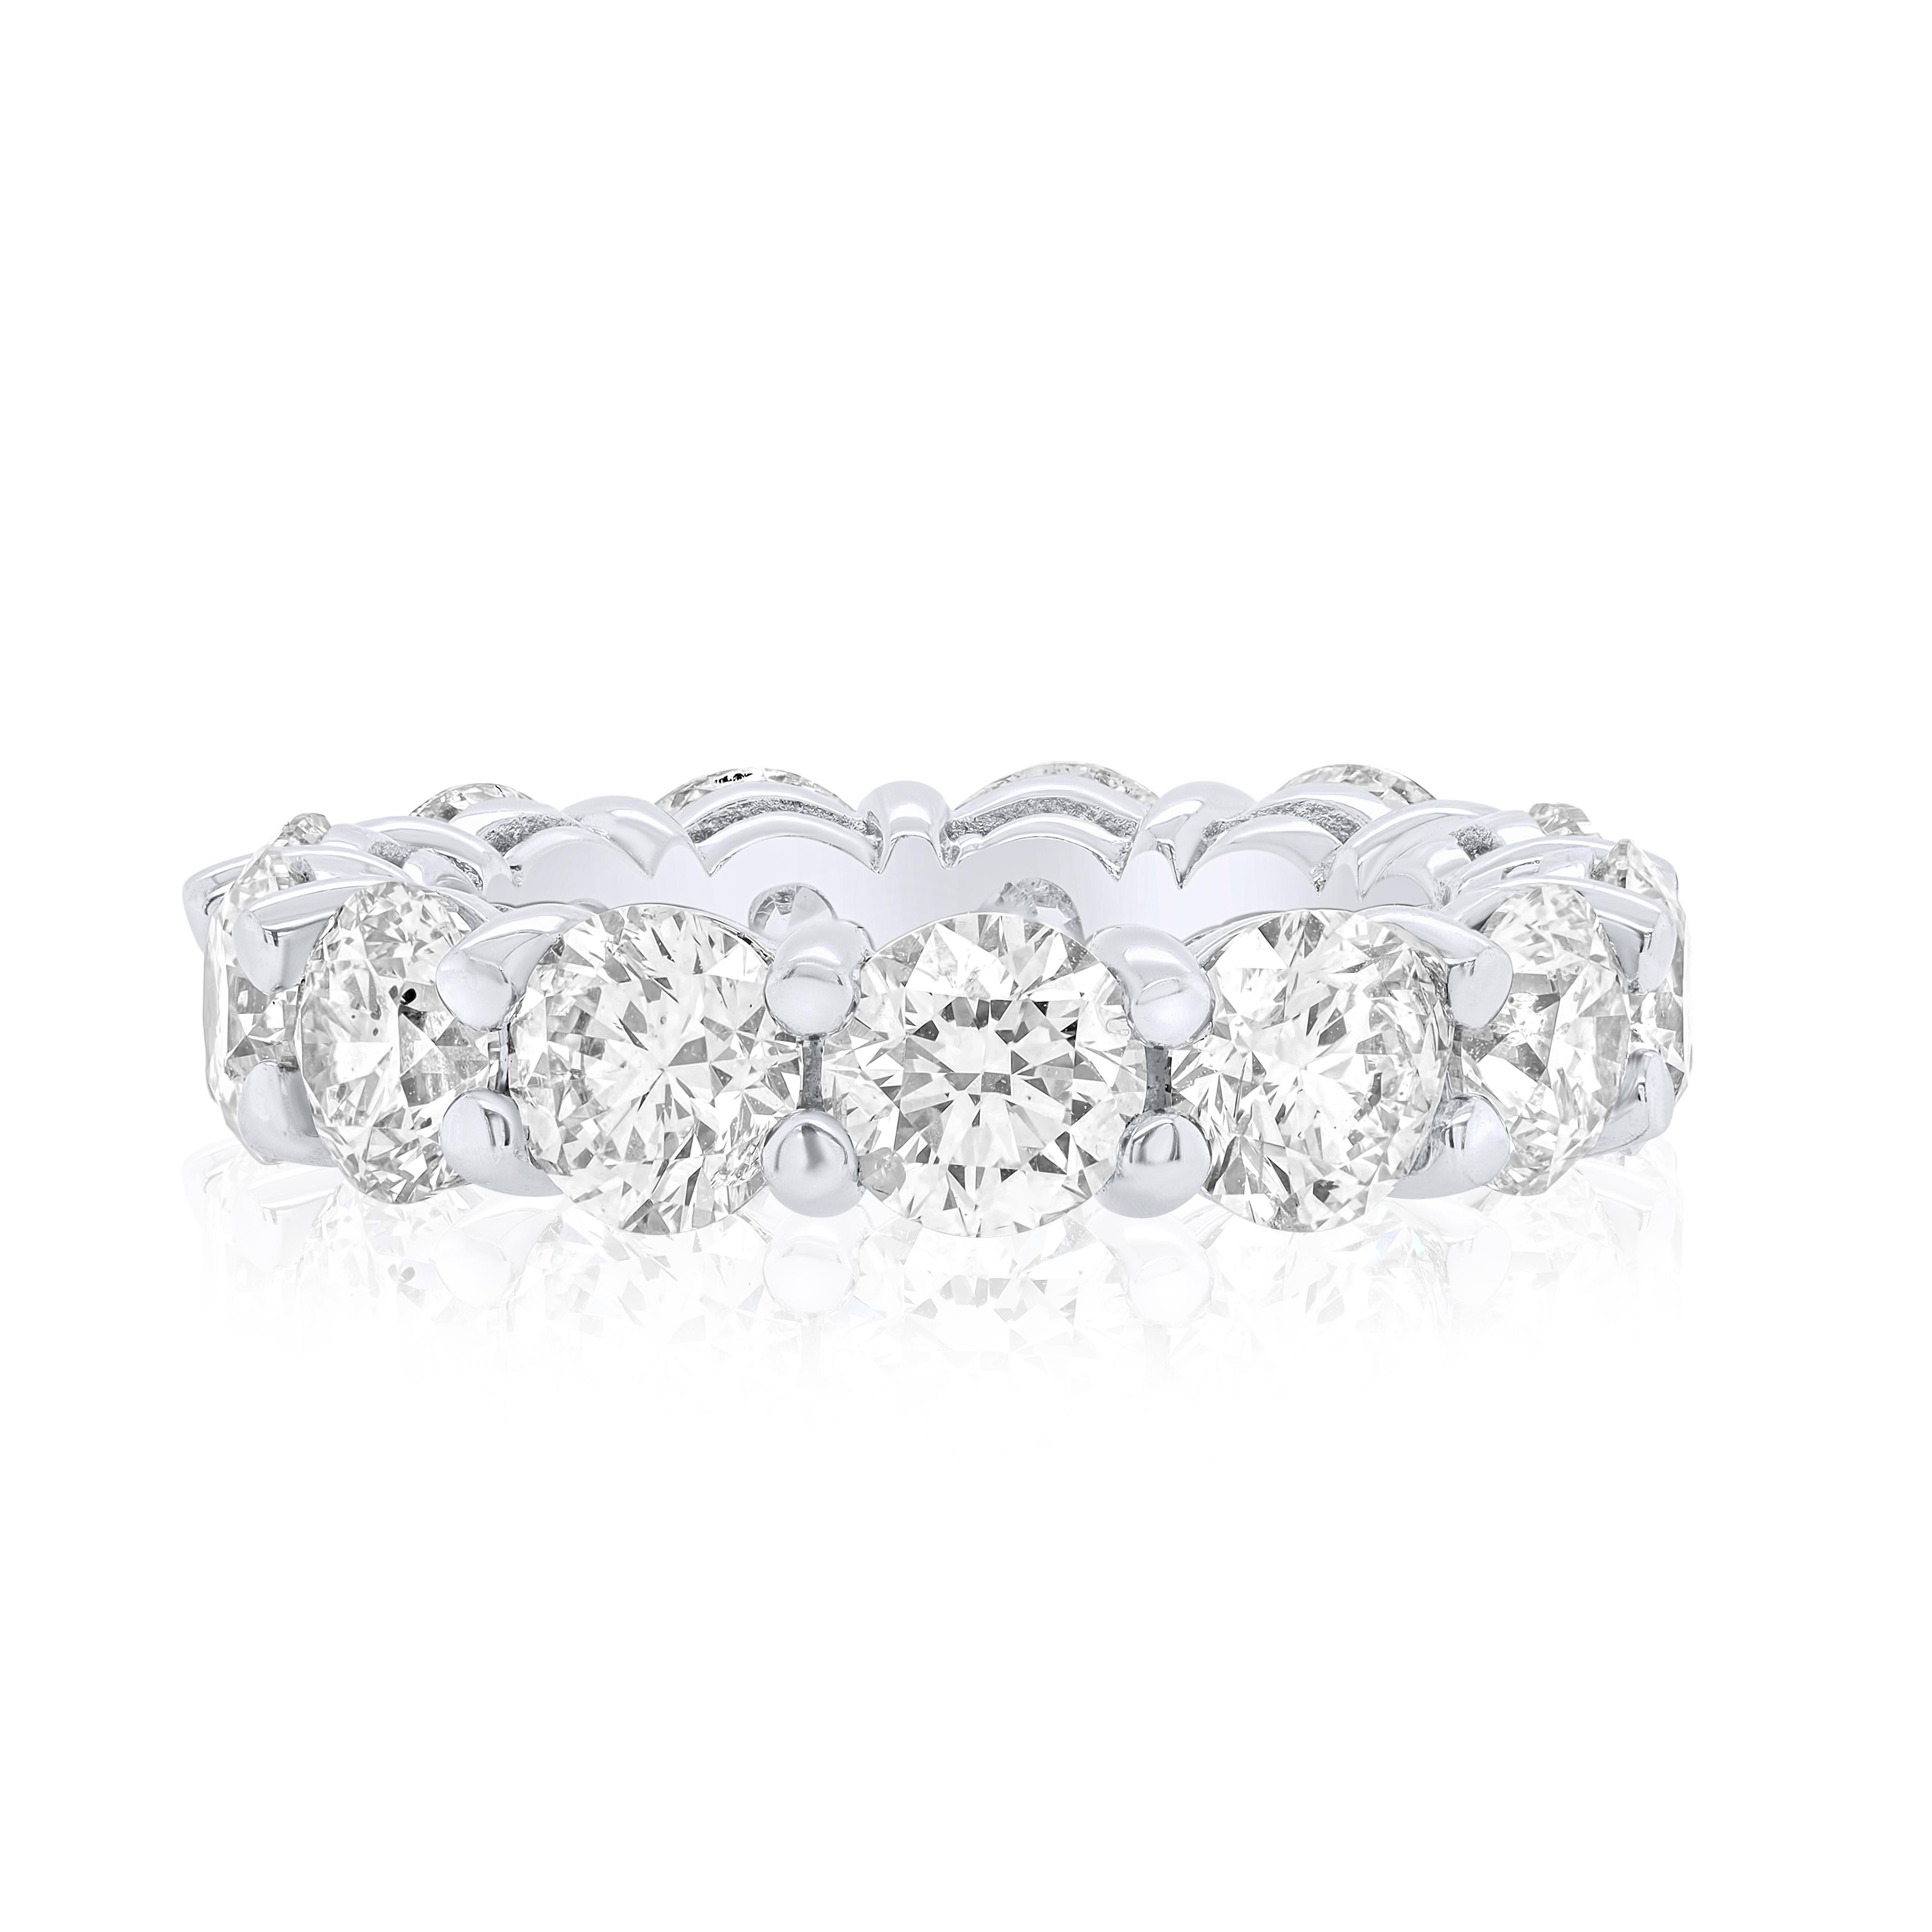 Modern Diana M. 18kt white gold all the way around diamond eternity band feature 4.55ct For Sale